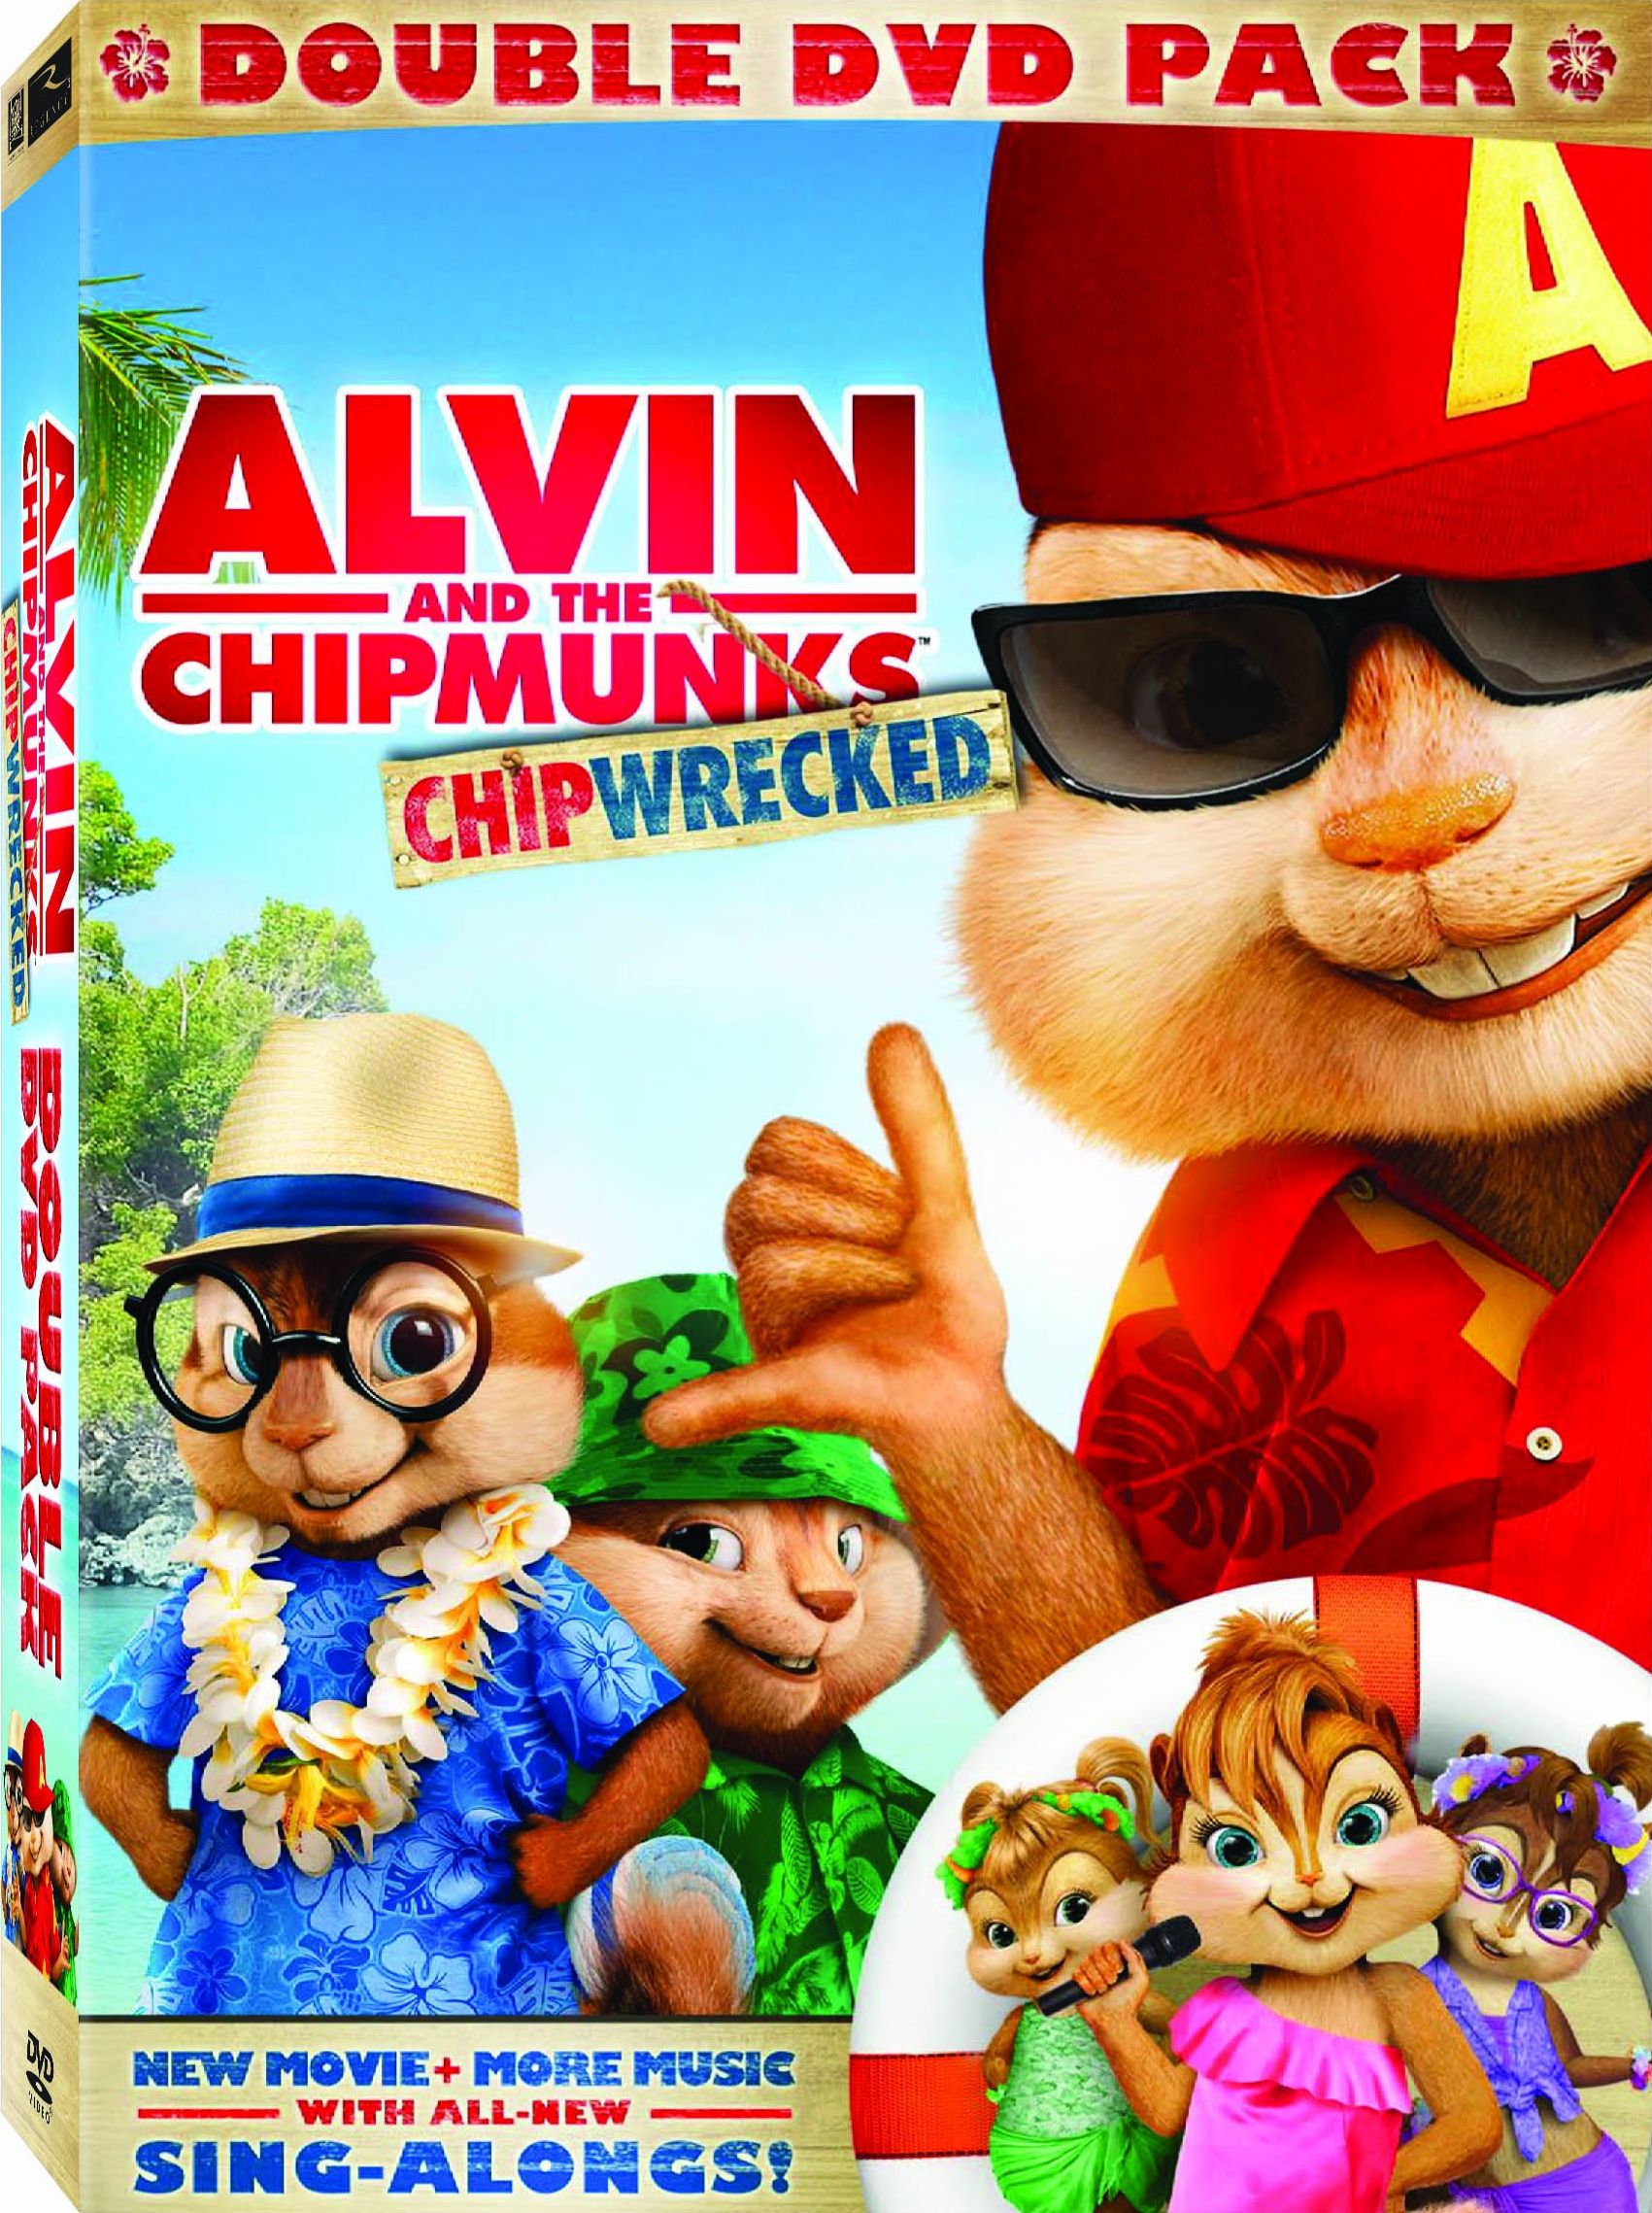 Alvin And The Chipmunks: Chipwrecked #6